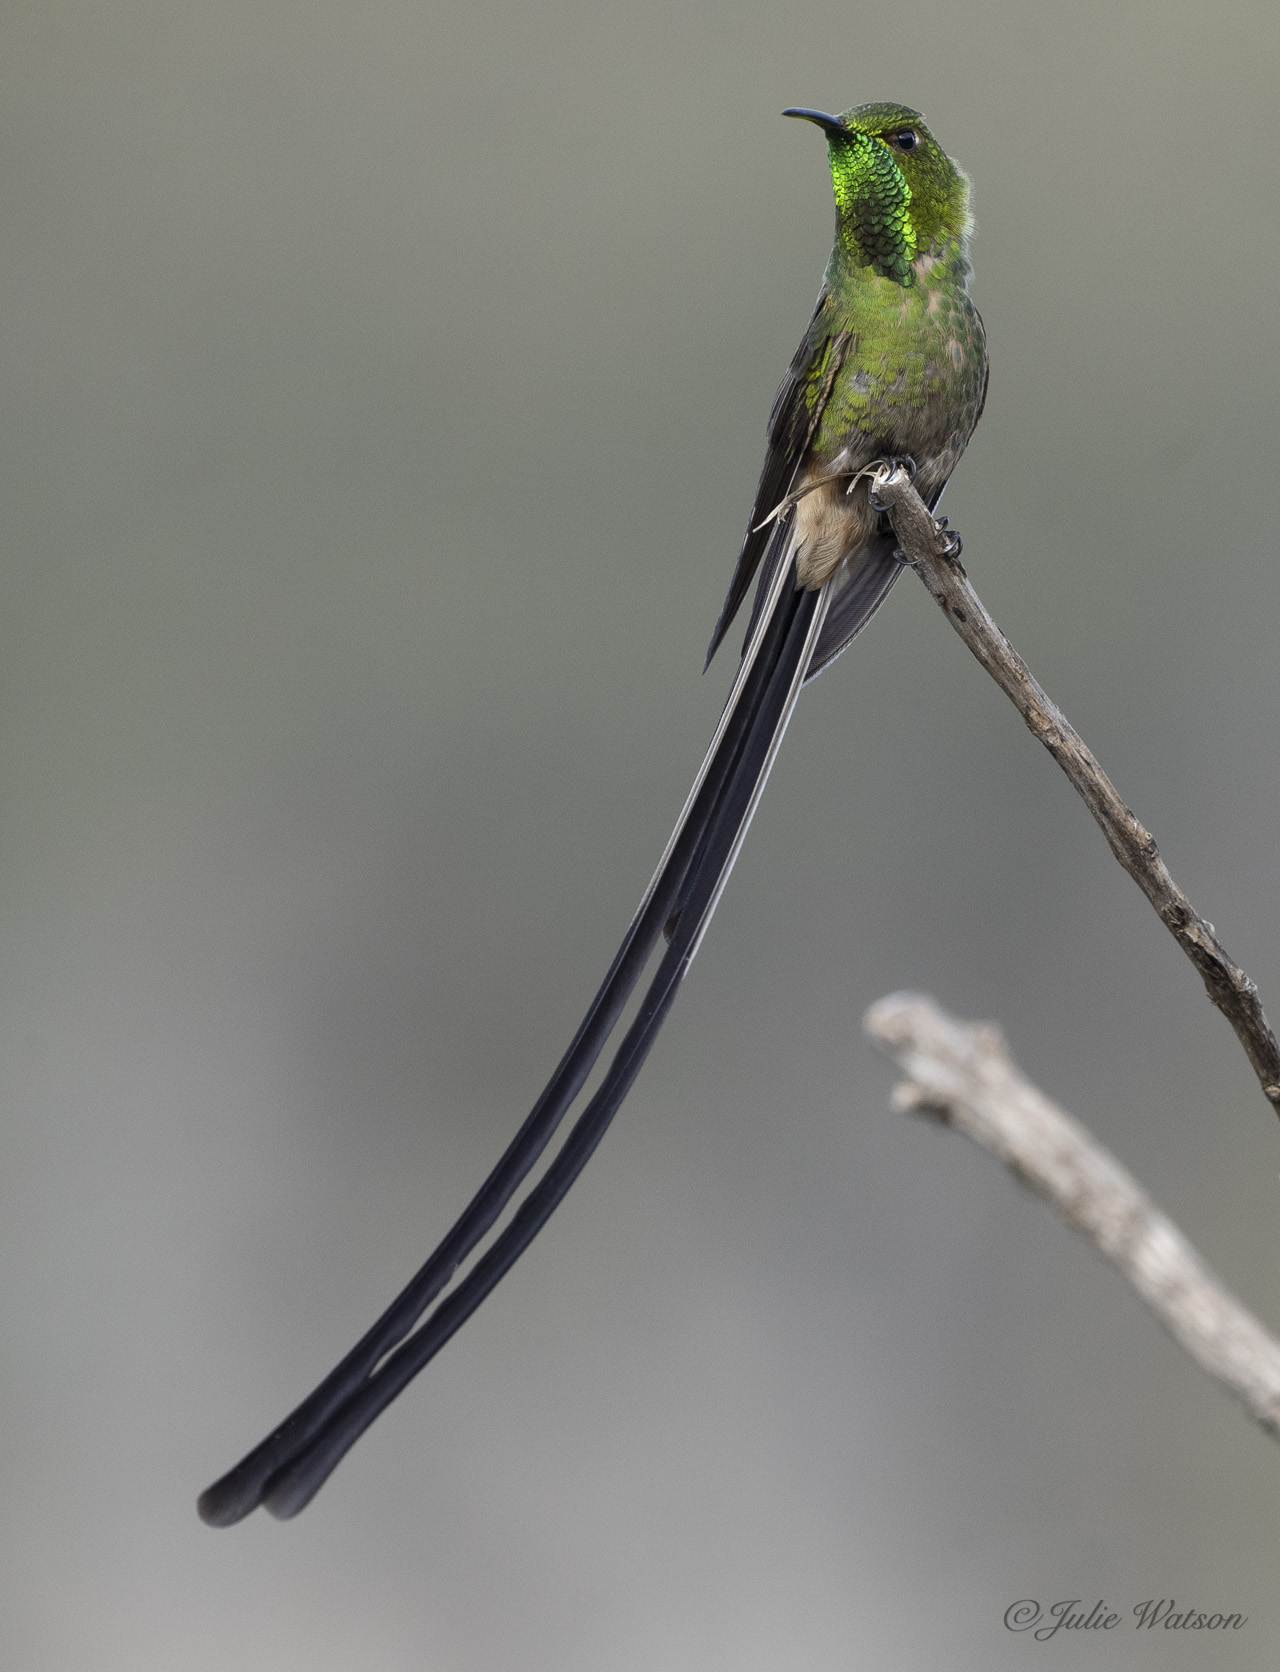 One of Ecuador's hummingbirds is the ‘Black Trainbearer’ that shows its iridescent green throat.